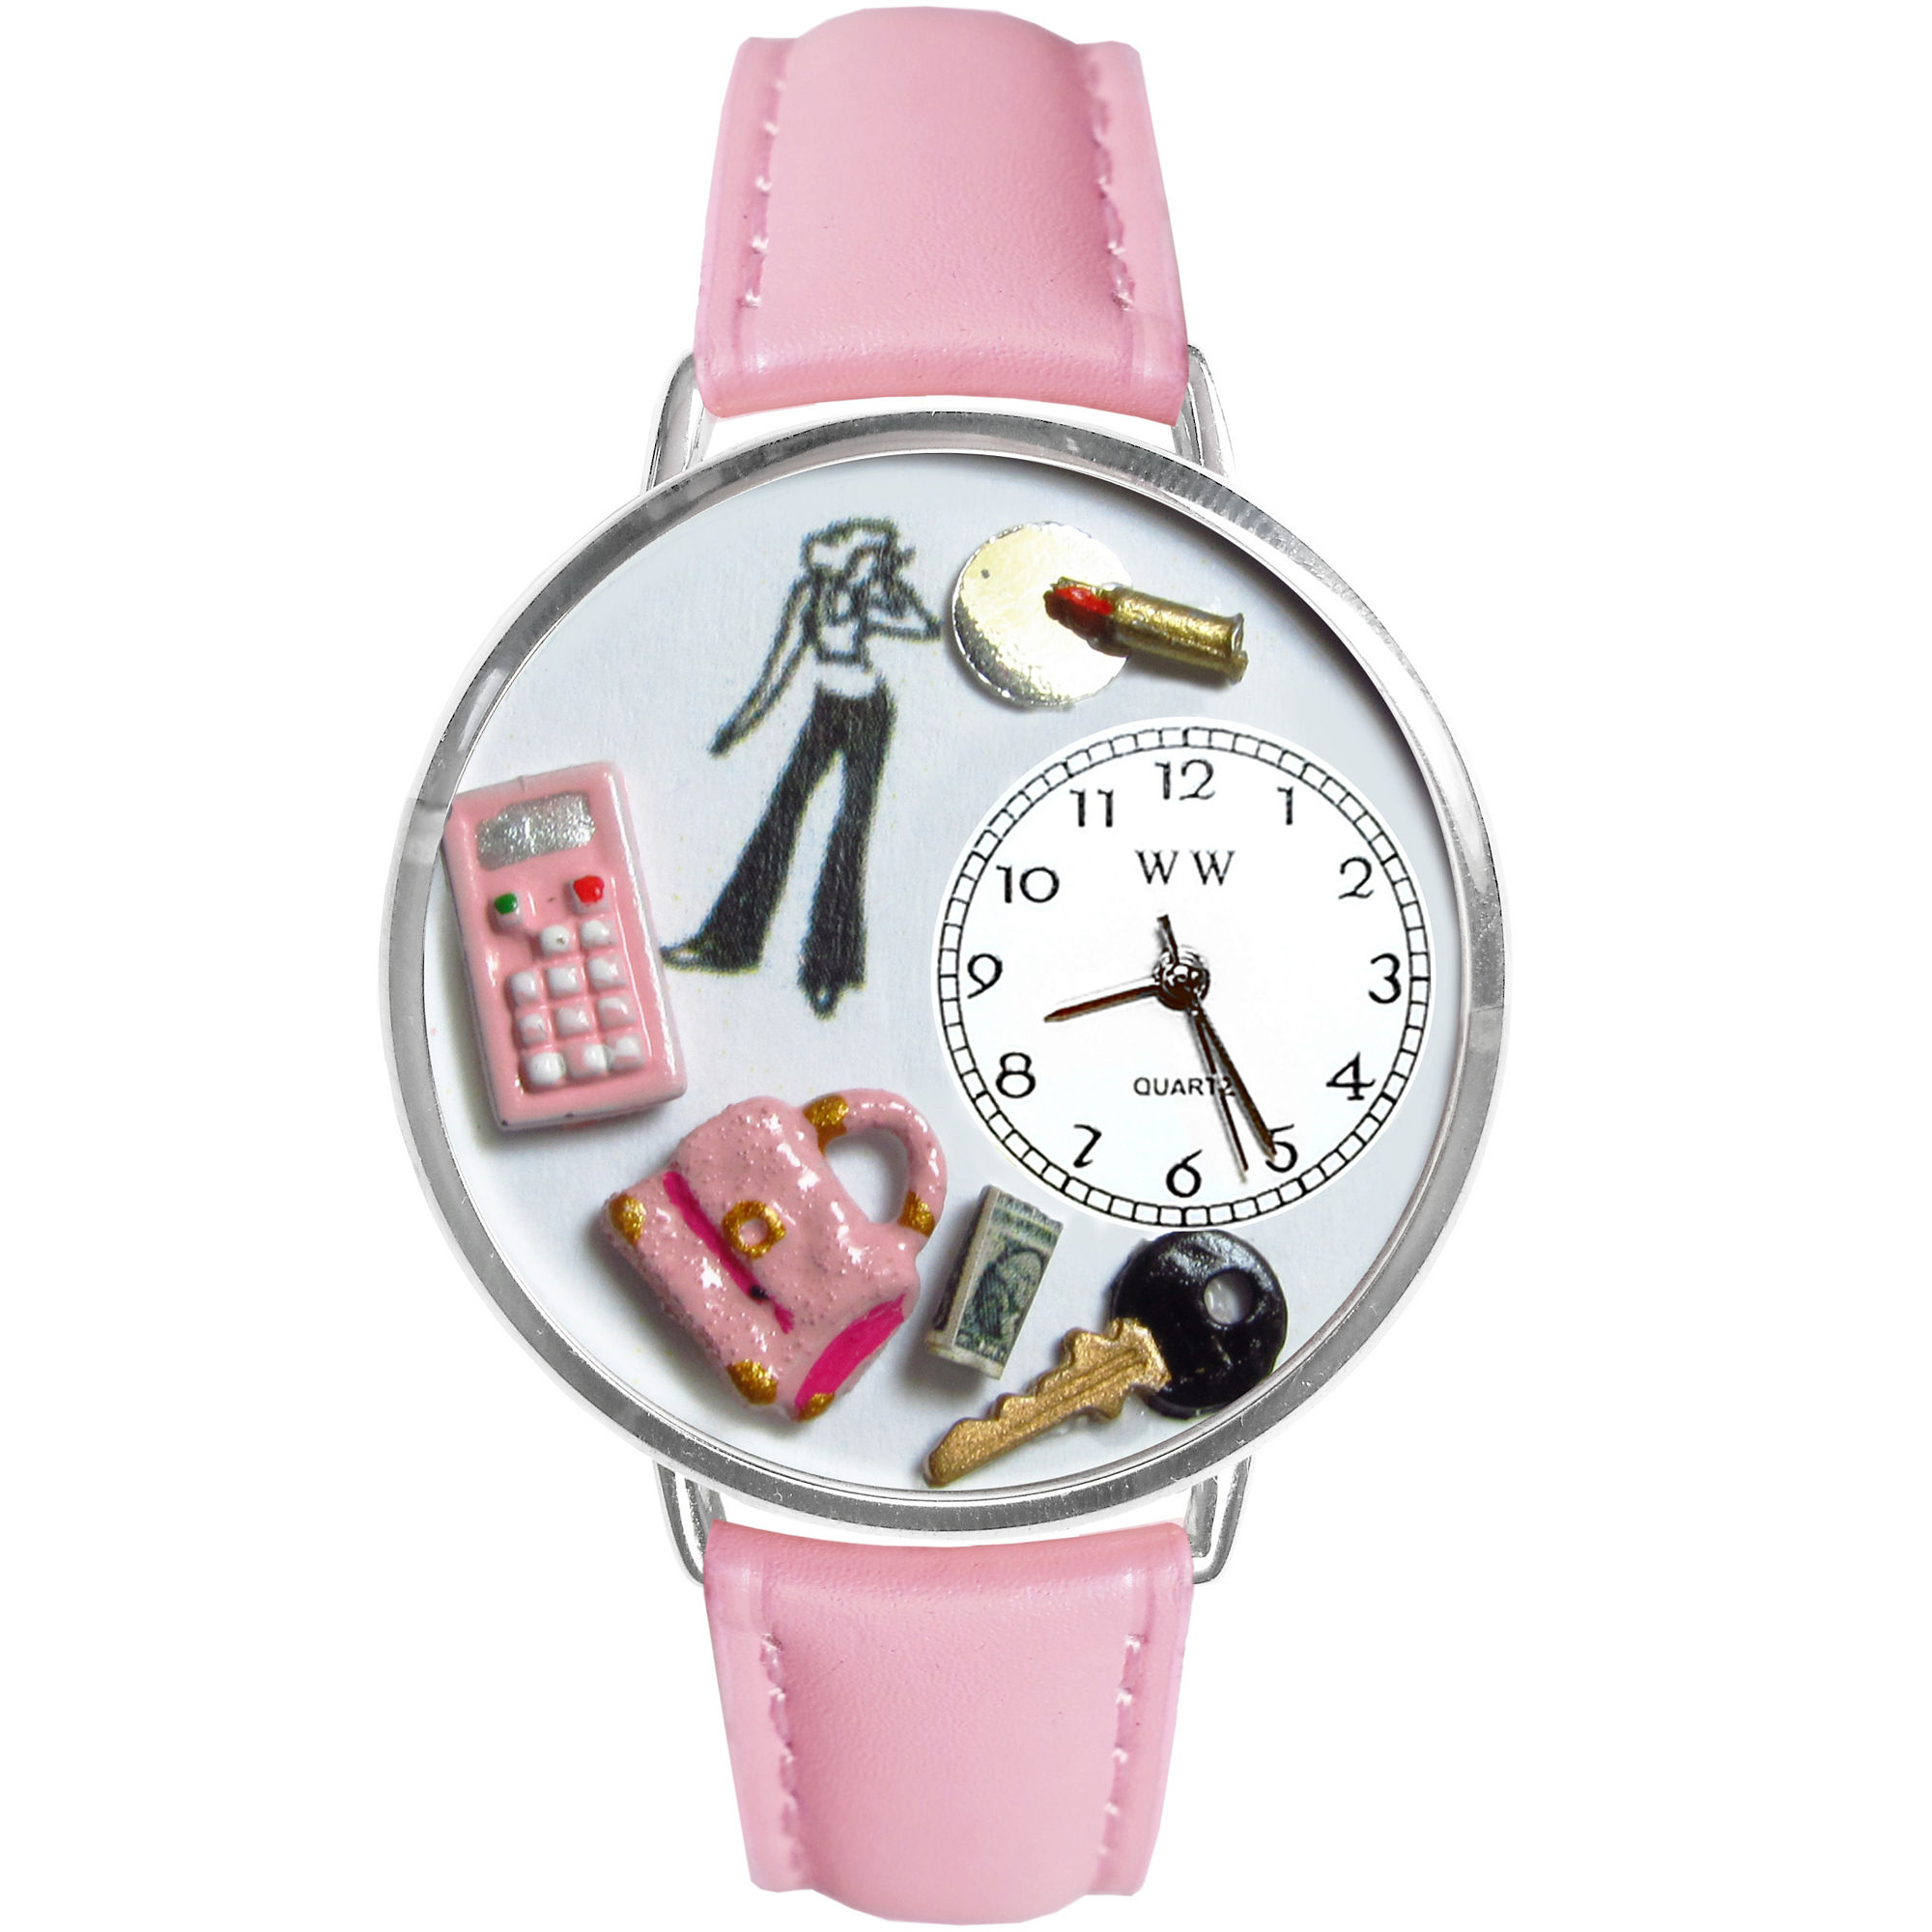 Whimsical Watches Personalized Teen Girl Womens Silver-Tone Bezel Pink Leather Strap Watch